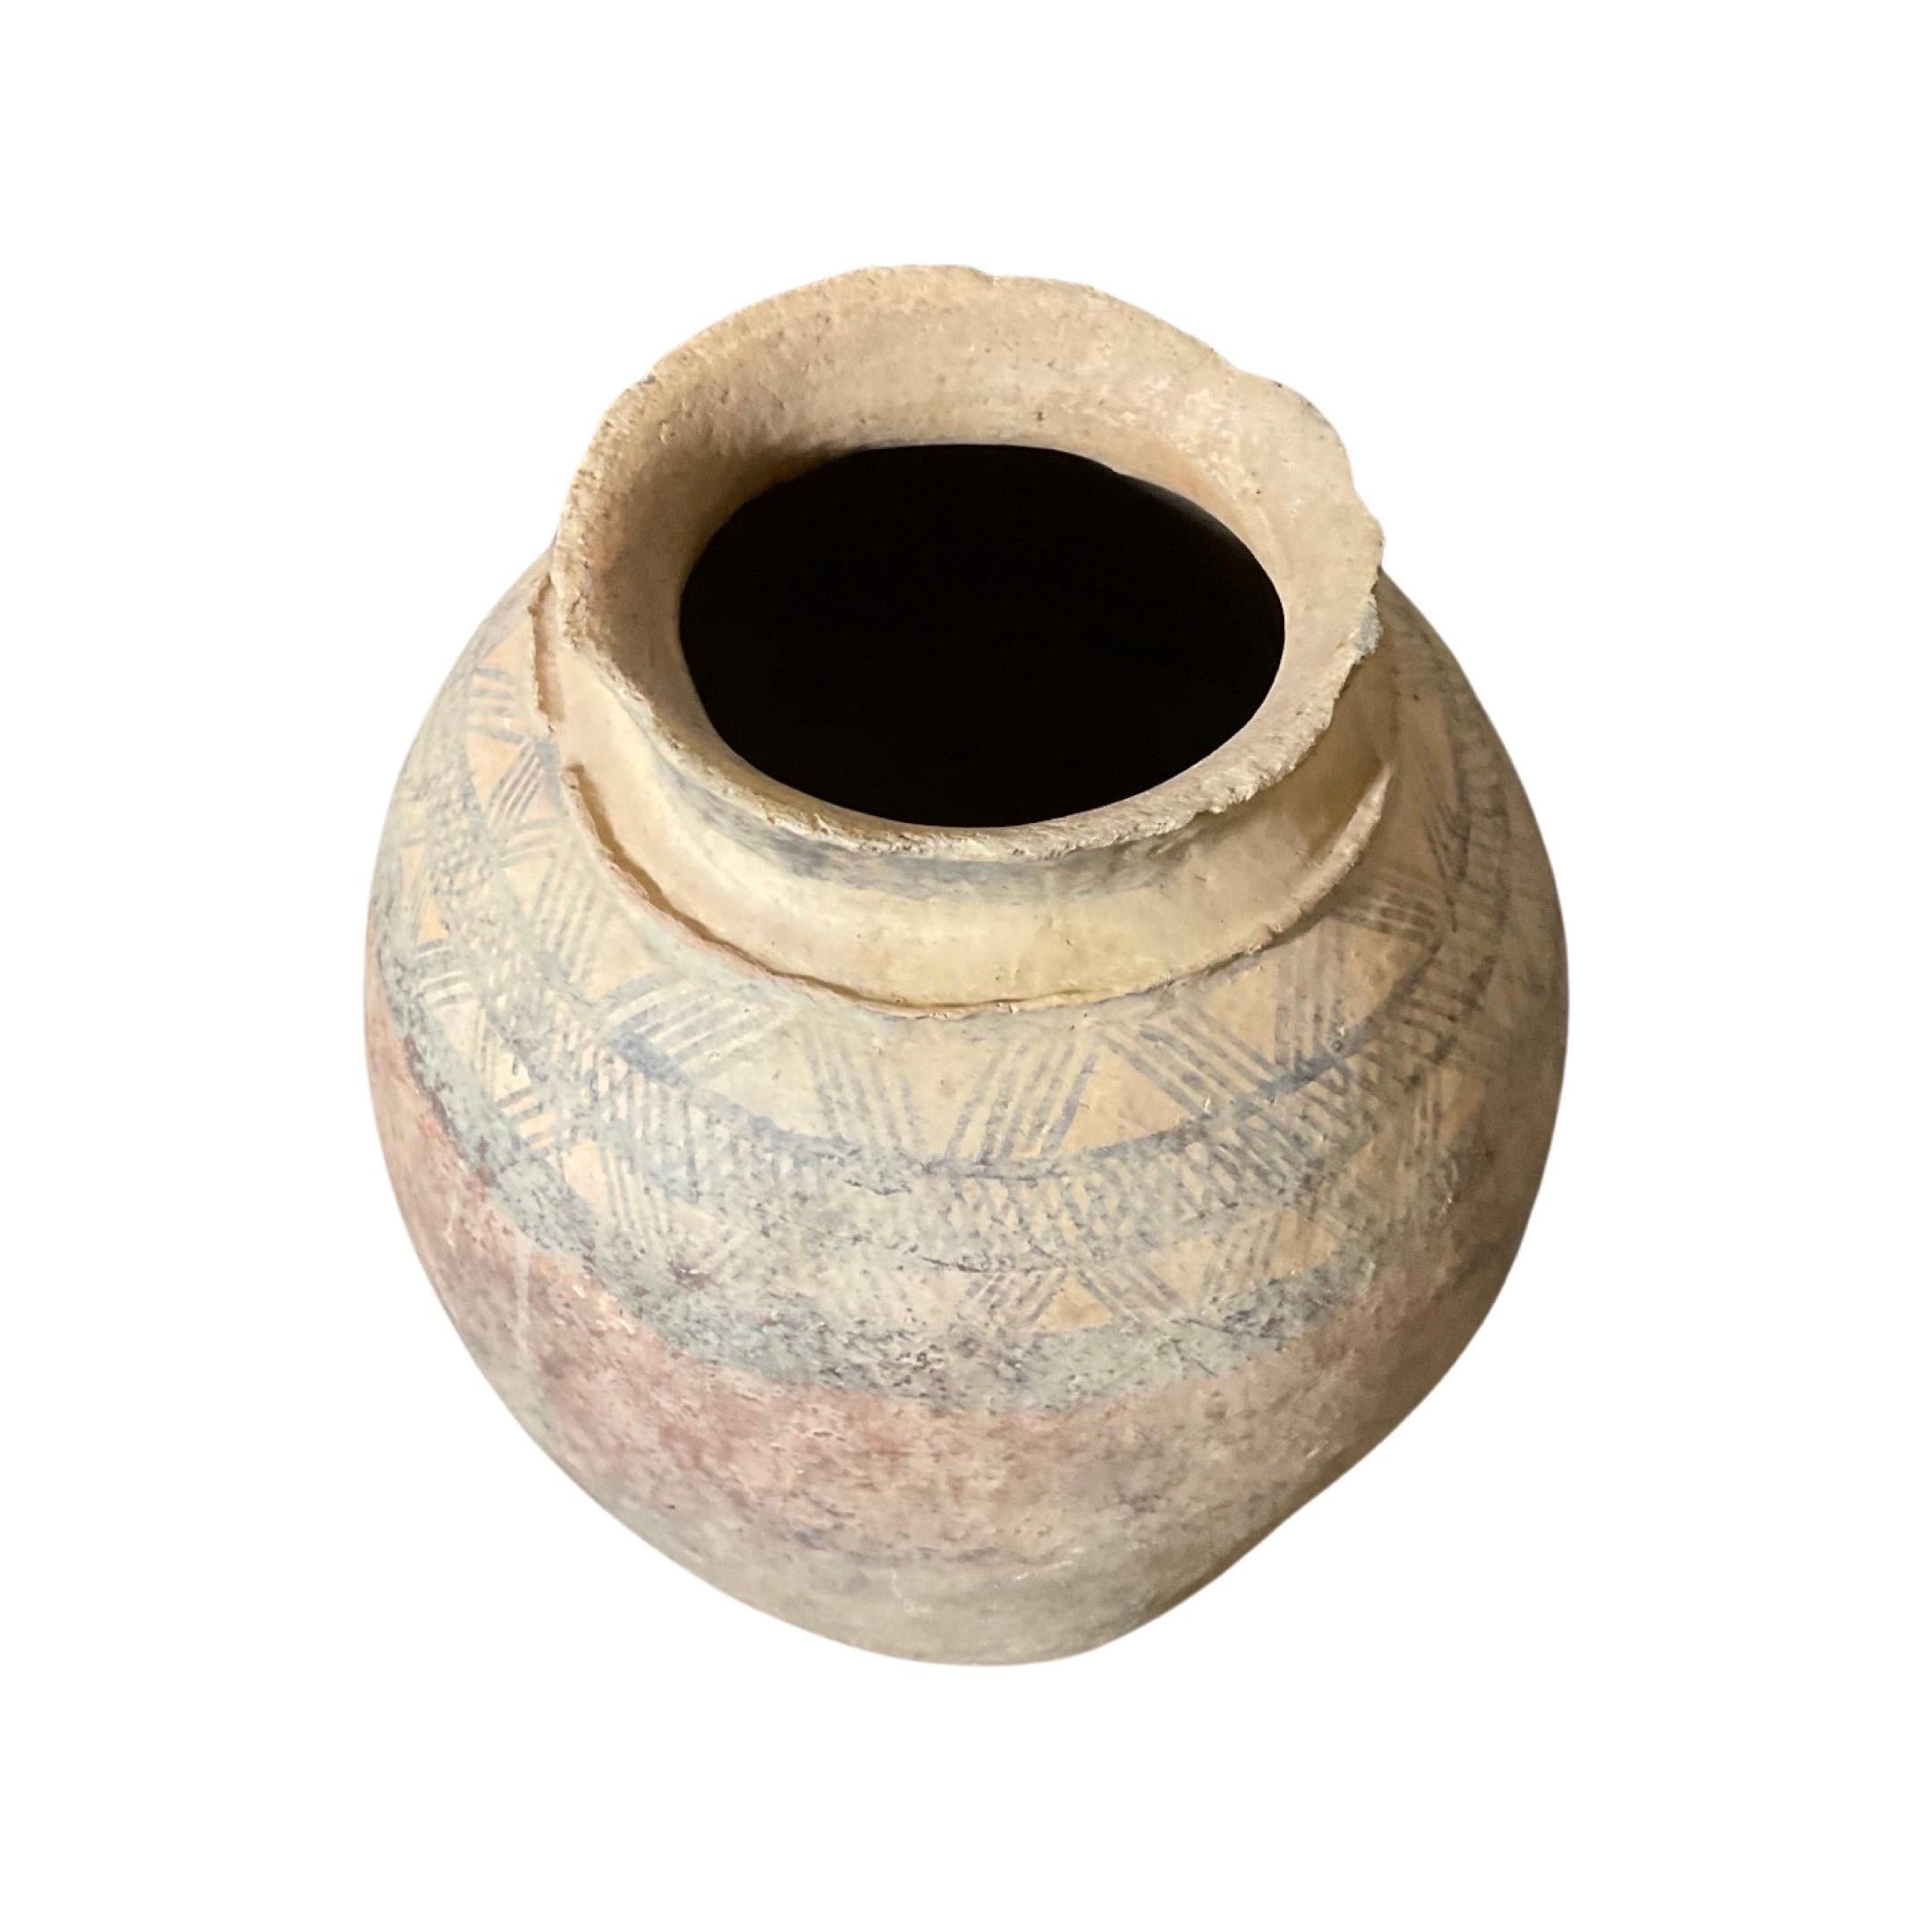 This antique North African terracotta vessel is a rare find, complete with a sturdy base holder for added stability. Its faded and unique African-inspired designs, dating back to the mid-1800s, add character and charm to any collection. Crafted